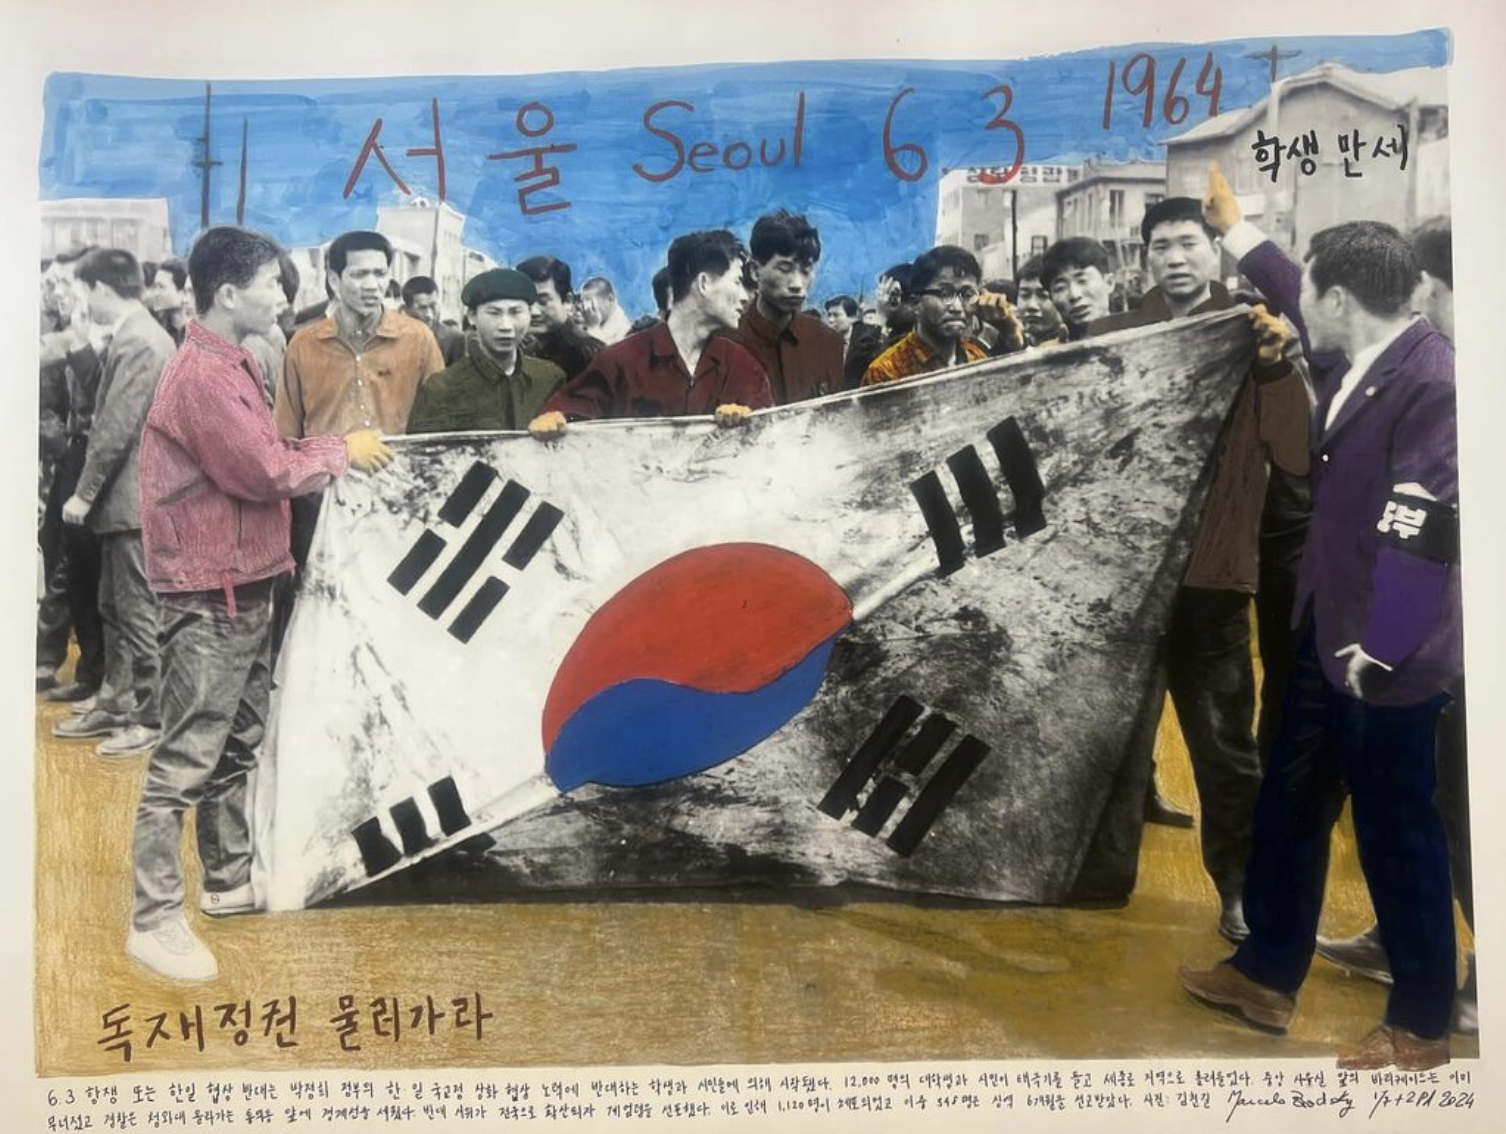 Marcelo Brodsky "Seoul 1964" from the series "1968: The Fire of Ideas".